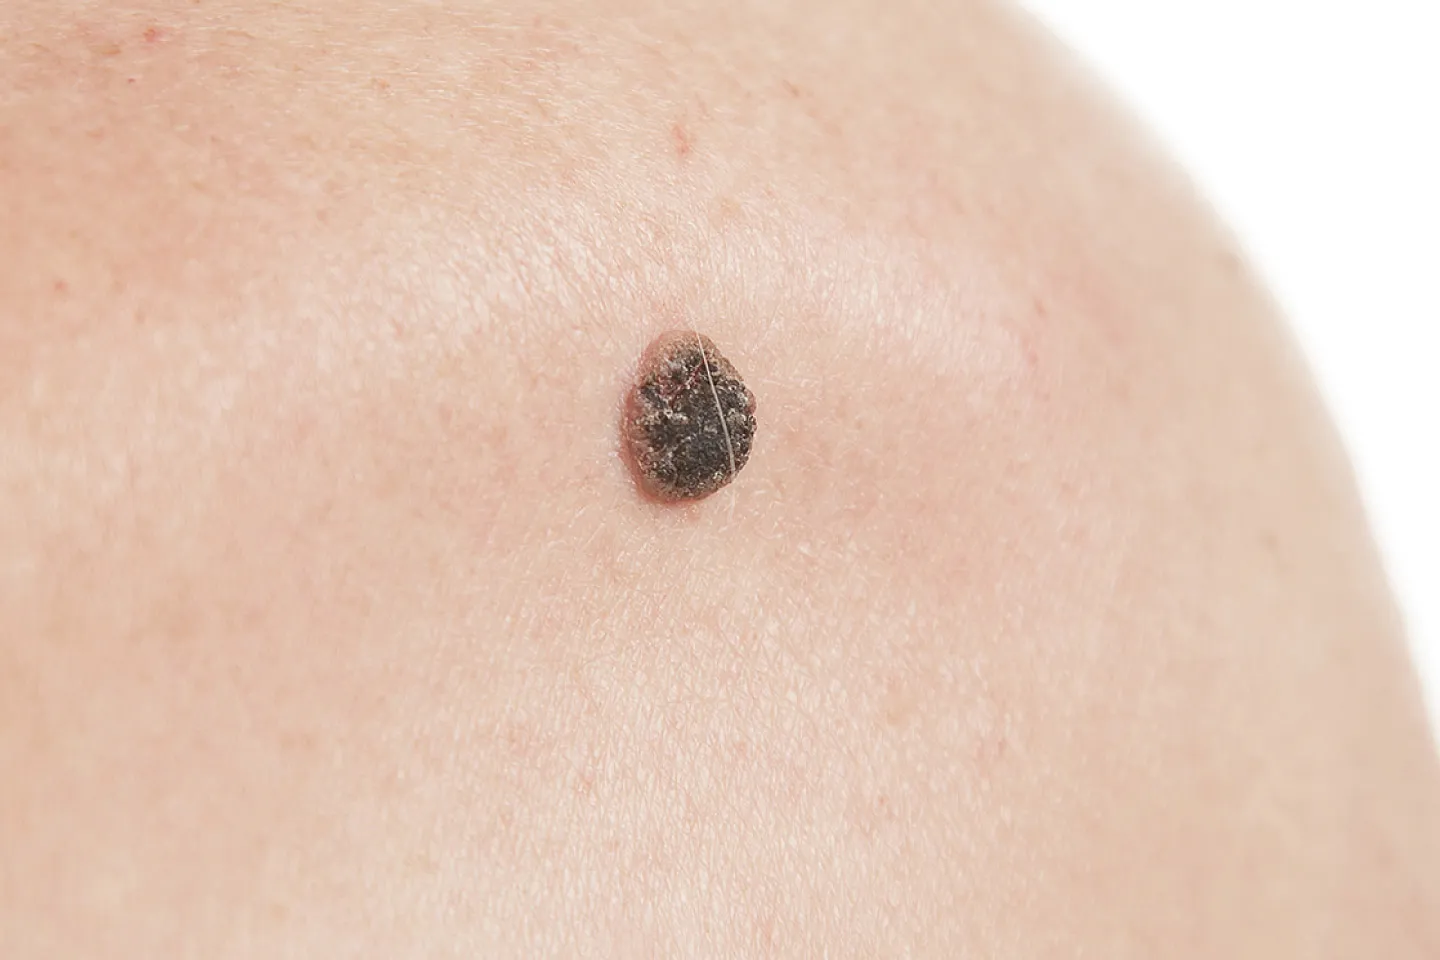 A close up of problem with basal cell carcinoma